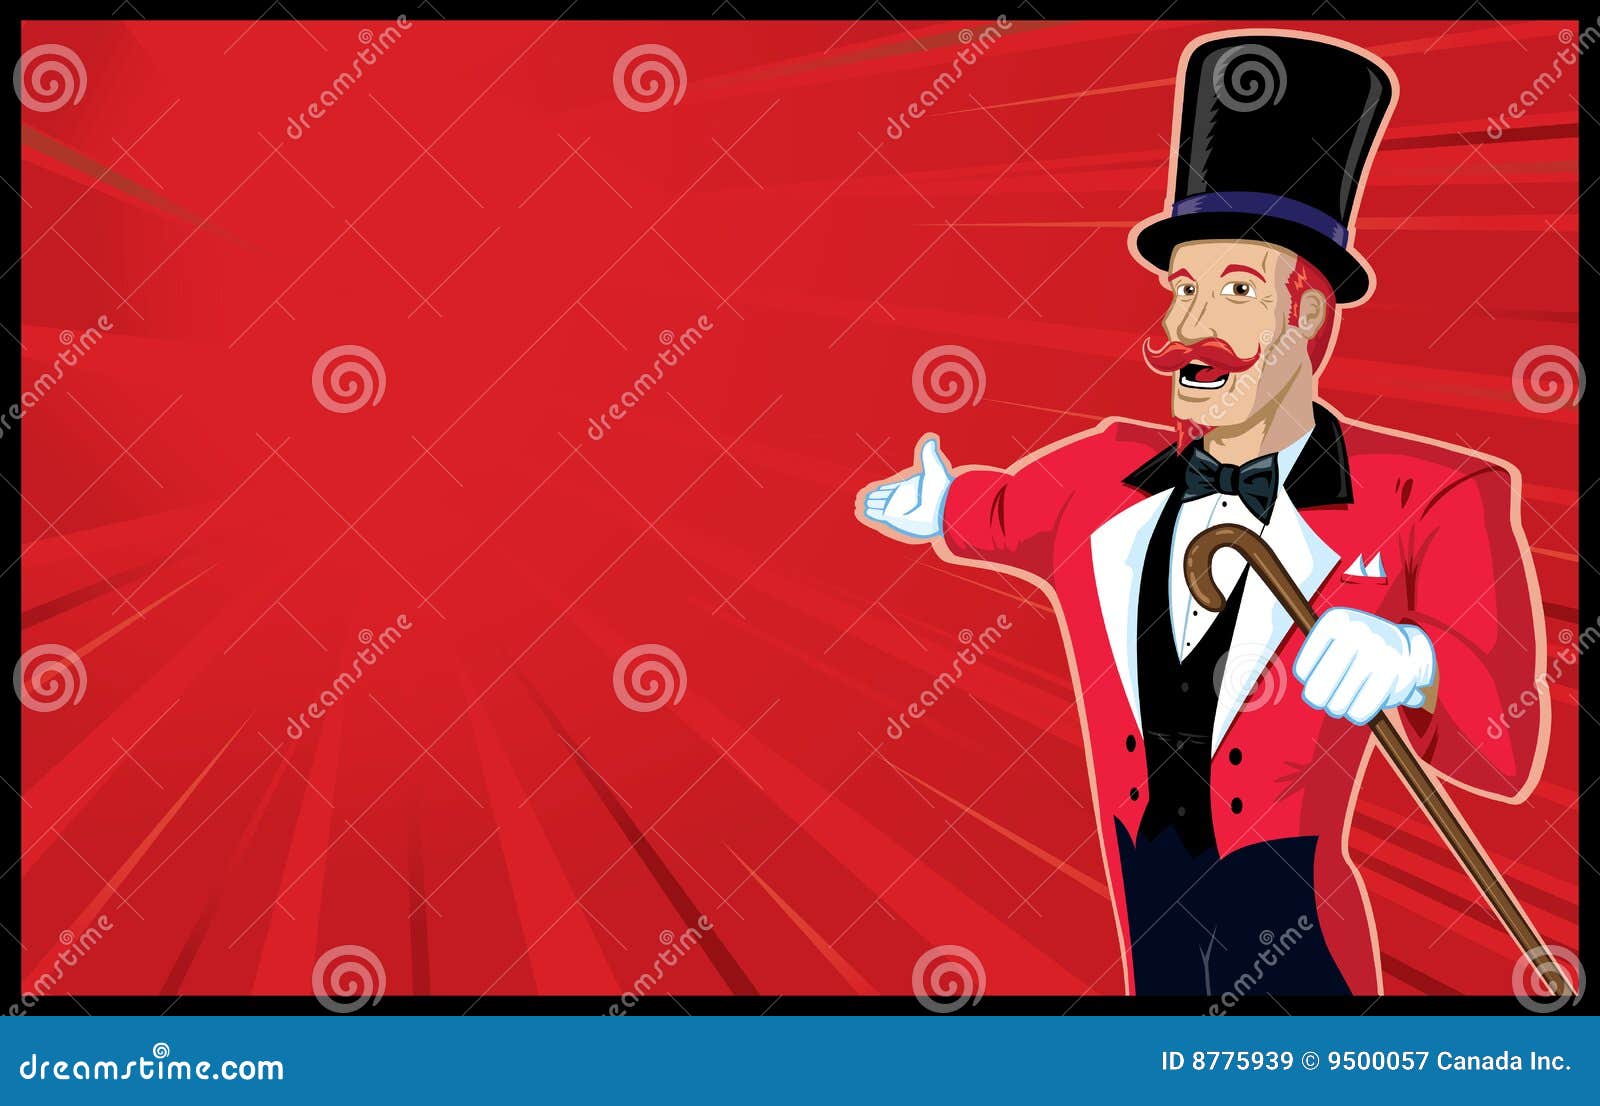 circus announcer with background